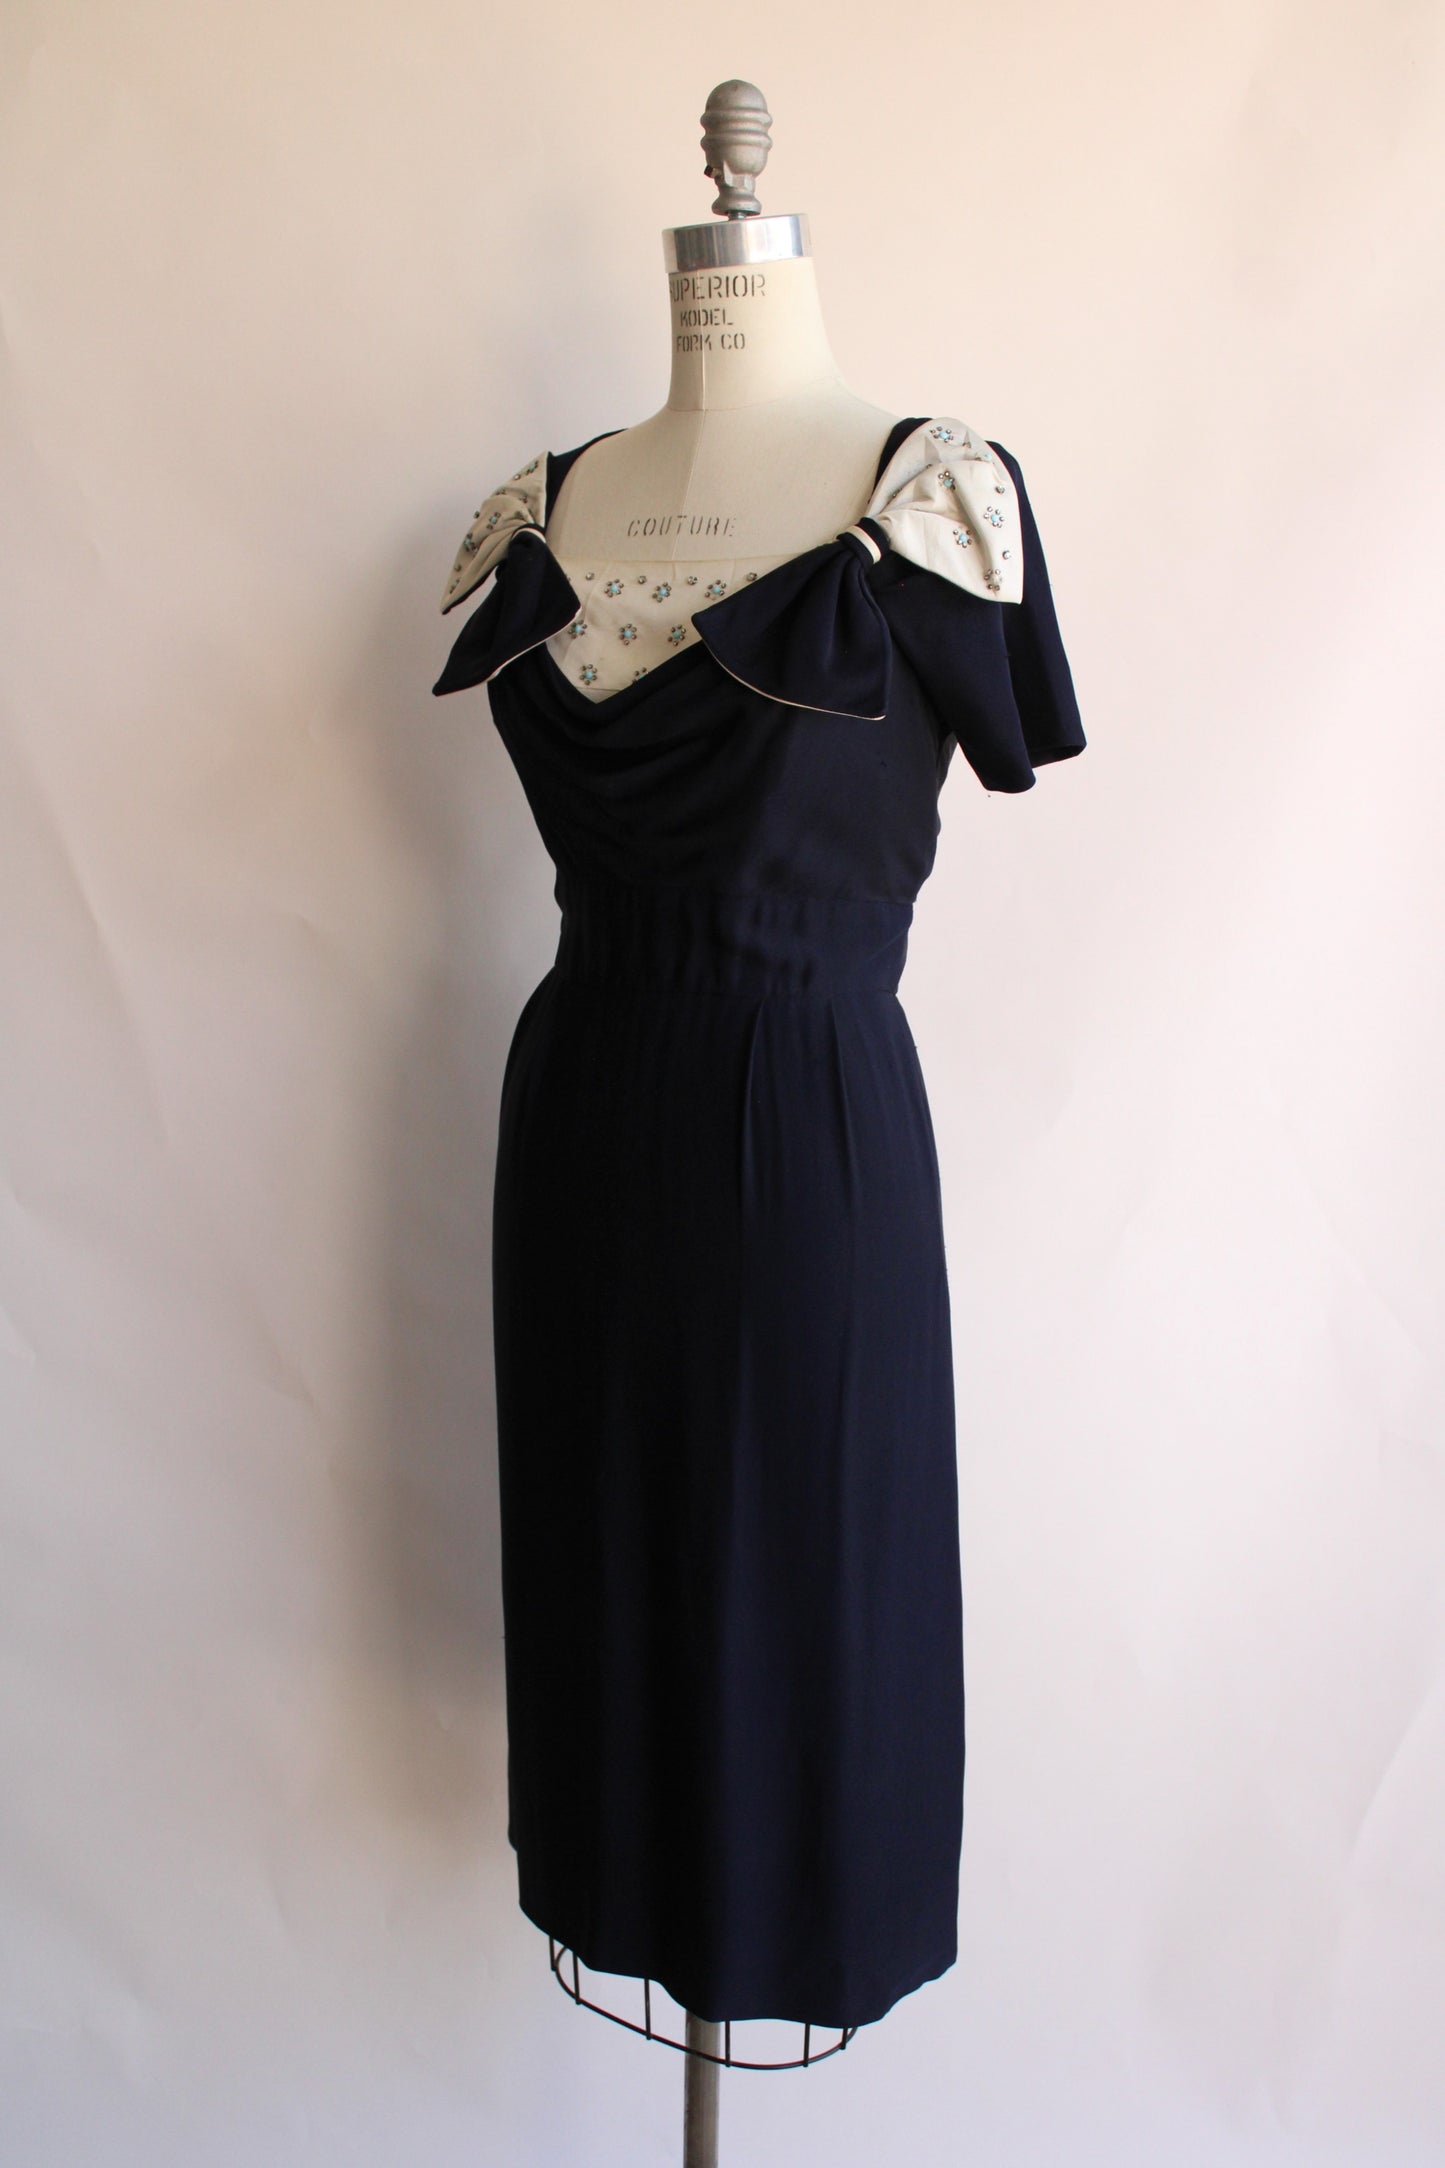 Vintage 1950s Navy Blue Cocktail Dress with Rhinestones